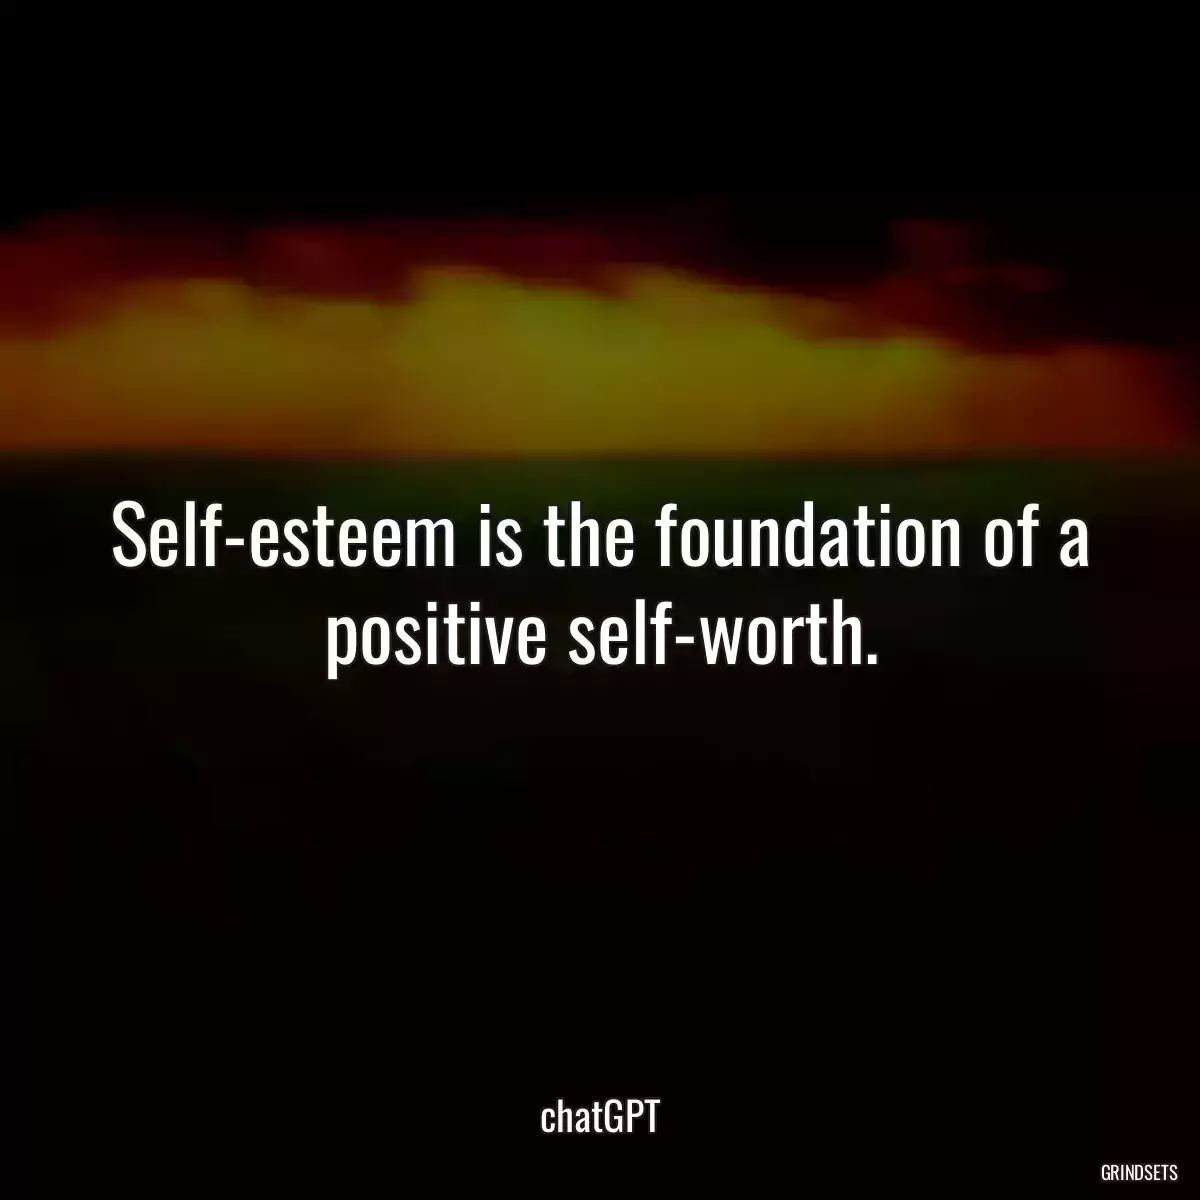 Self-esteem is the foundation of a positive self-worth.